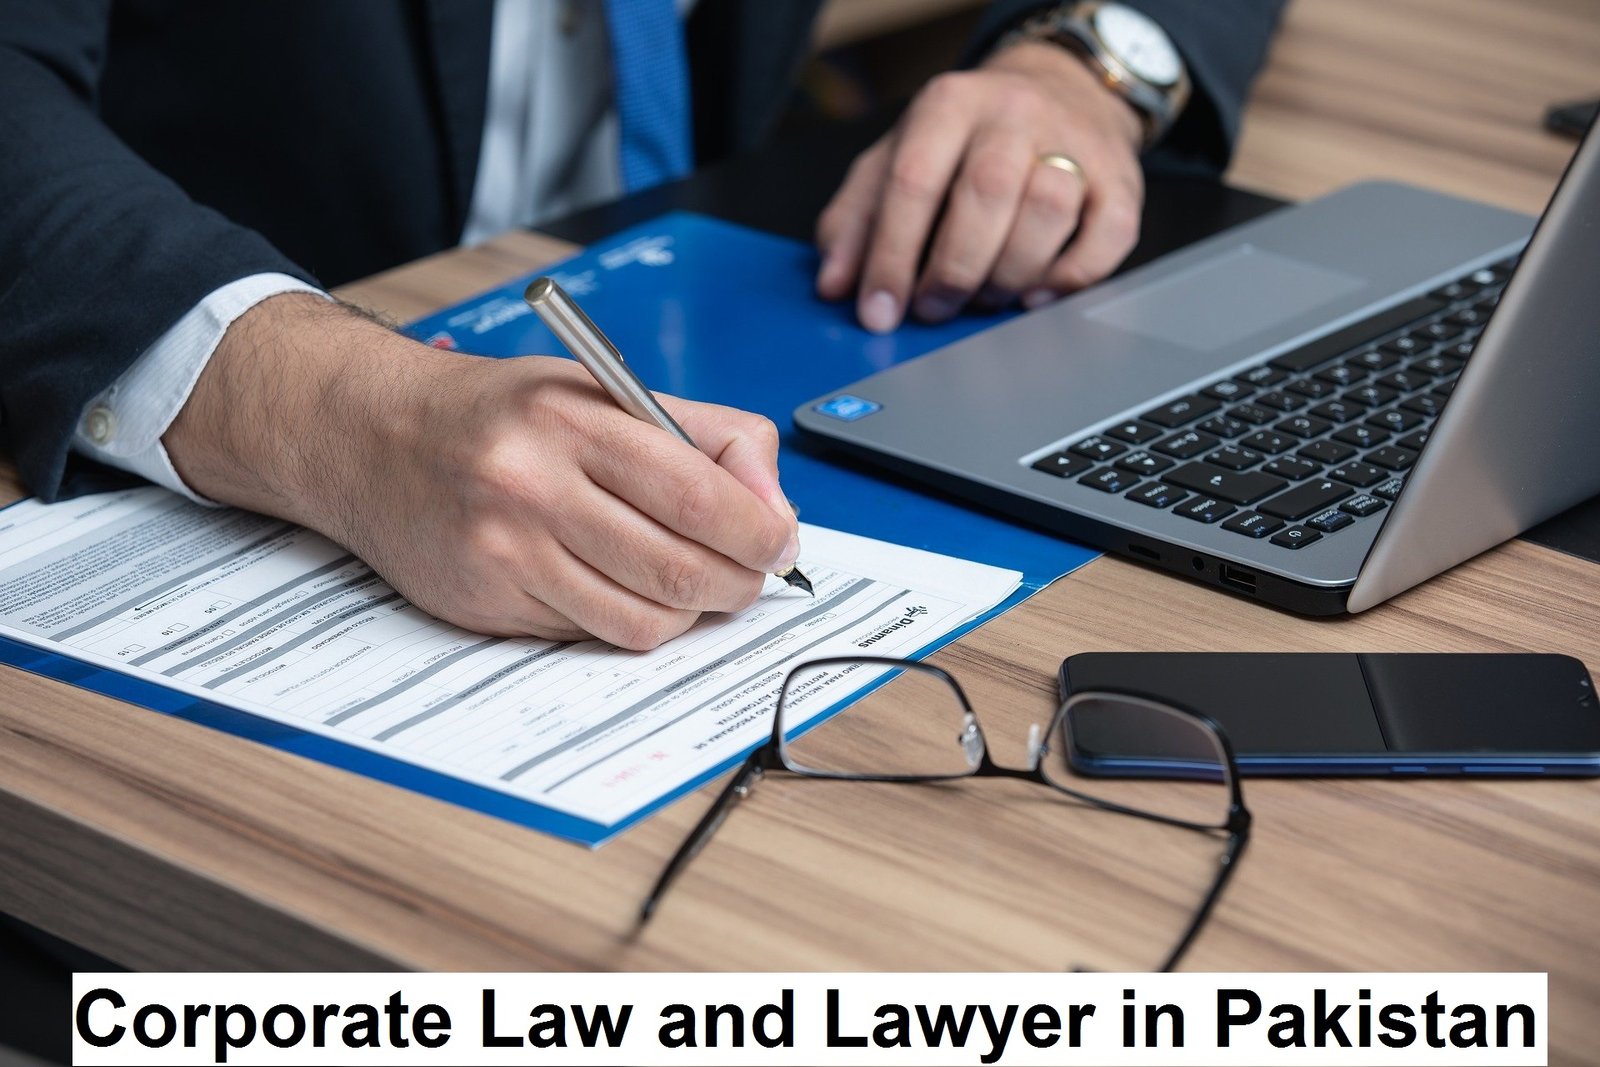 Corporate Law and Lawyer in Pakistan